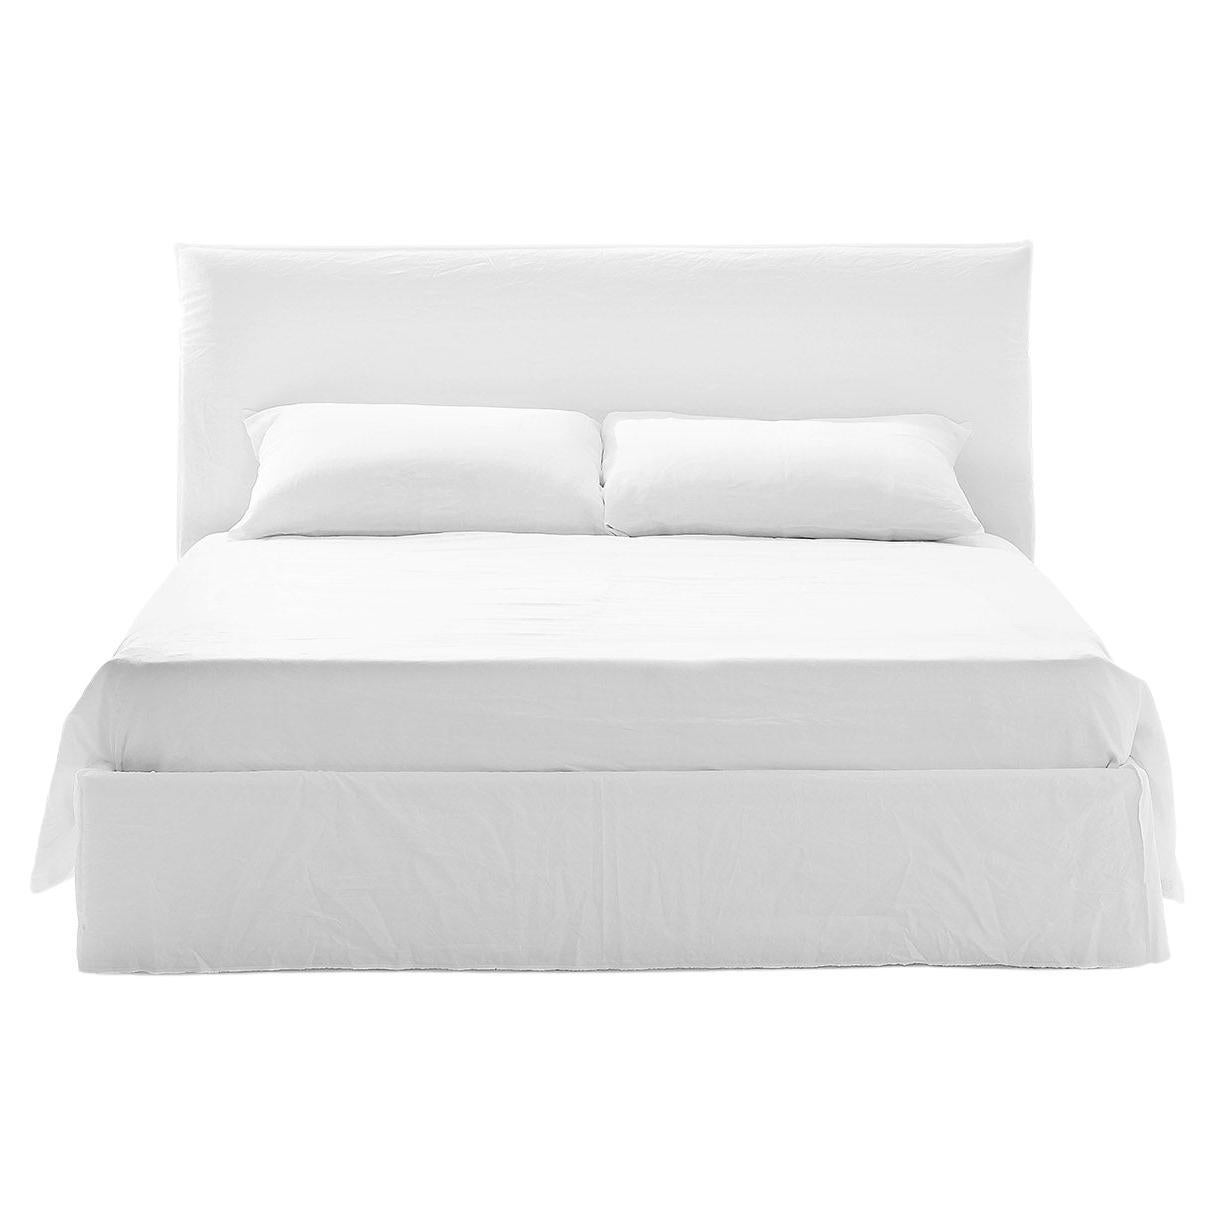 Gervasoni Ghost 80 F Knock Down Bed in White Linen Upholstery by Paola Navone